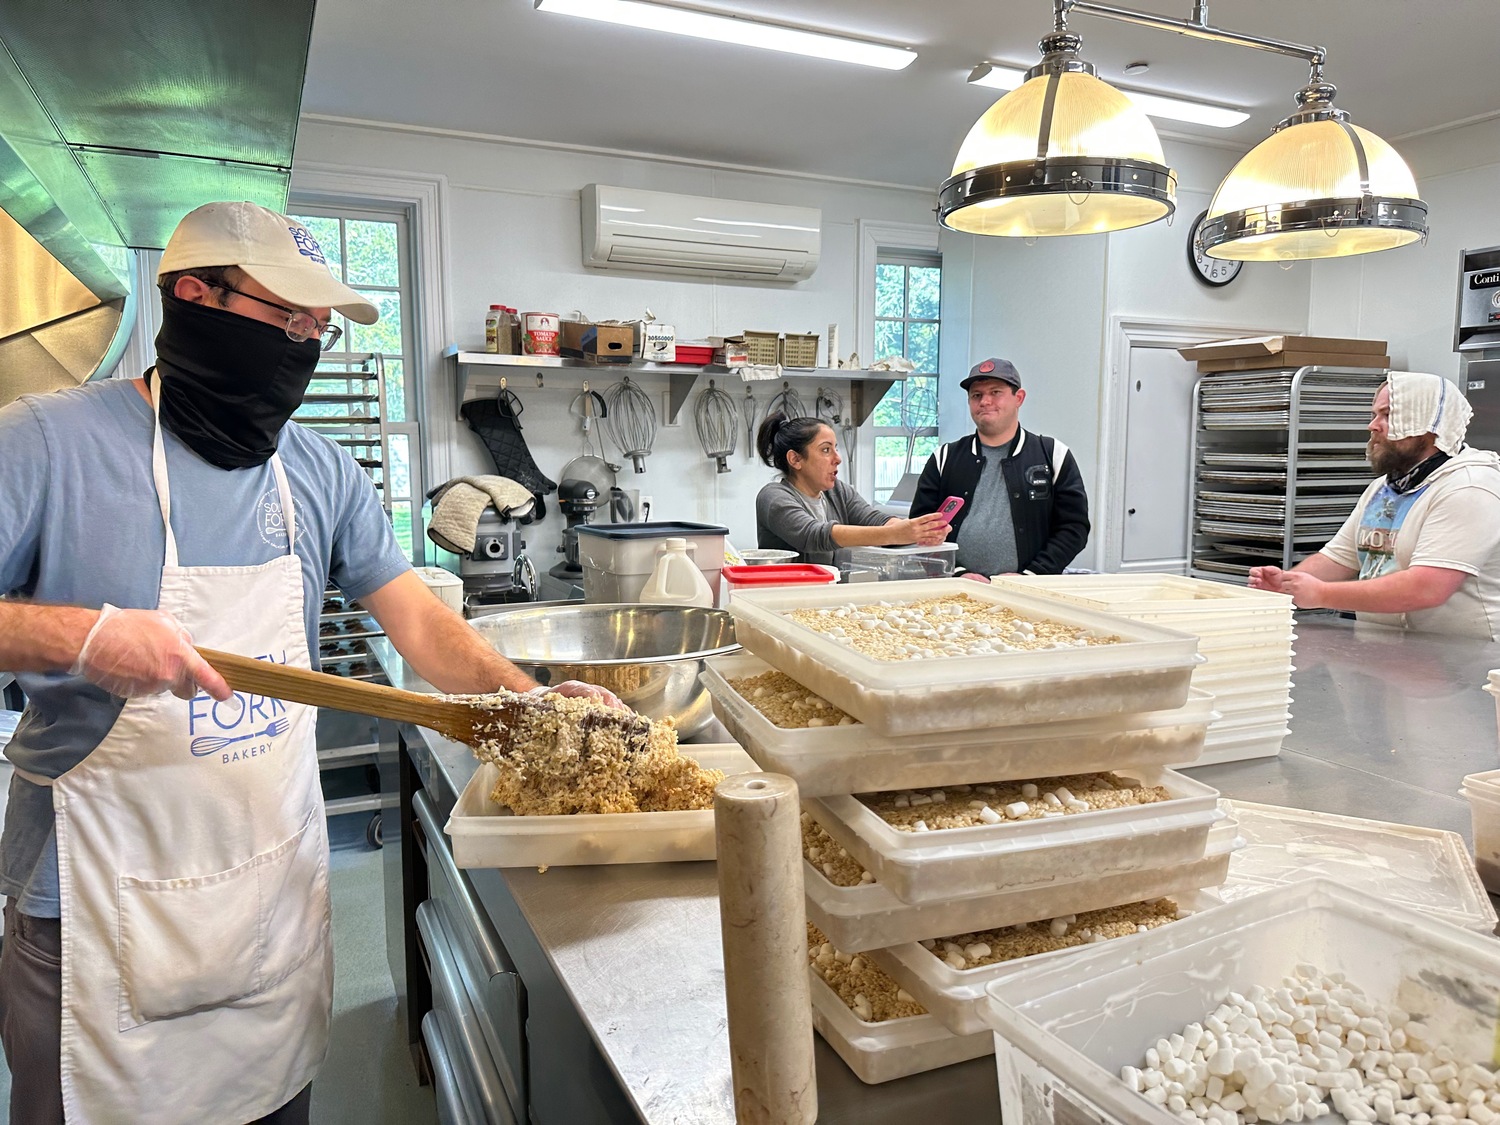 Employees at work in the South Fork Bakery kitchen in Amagansett. ANNETTE HINKLE